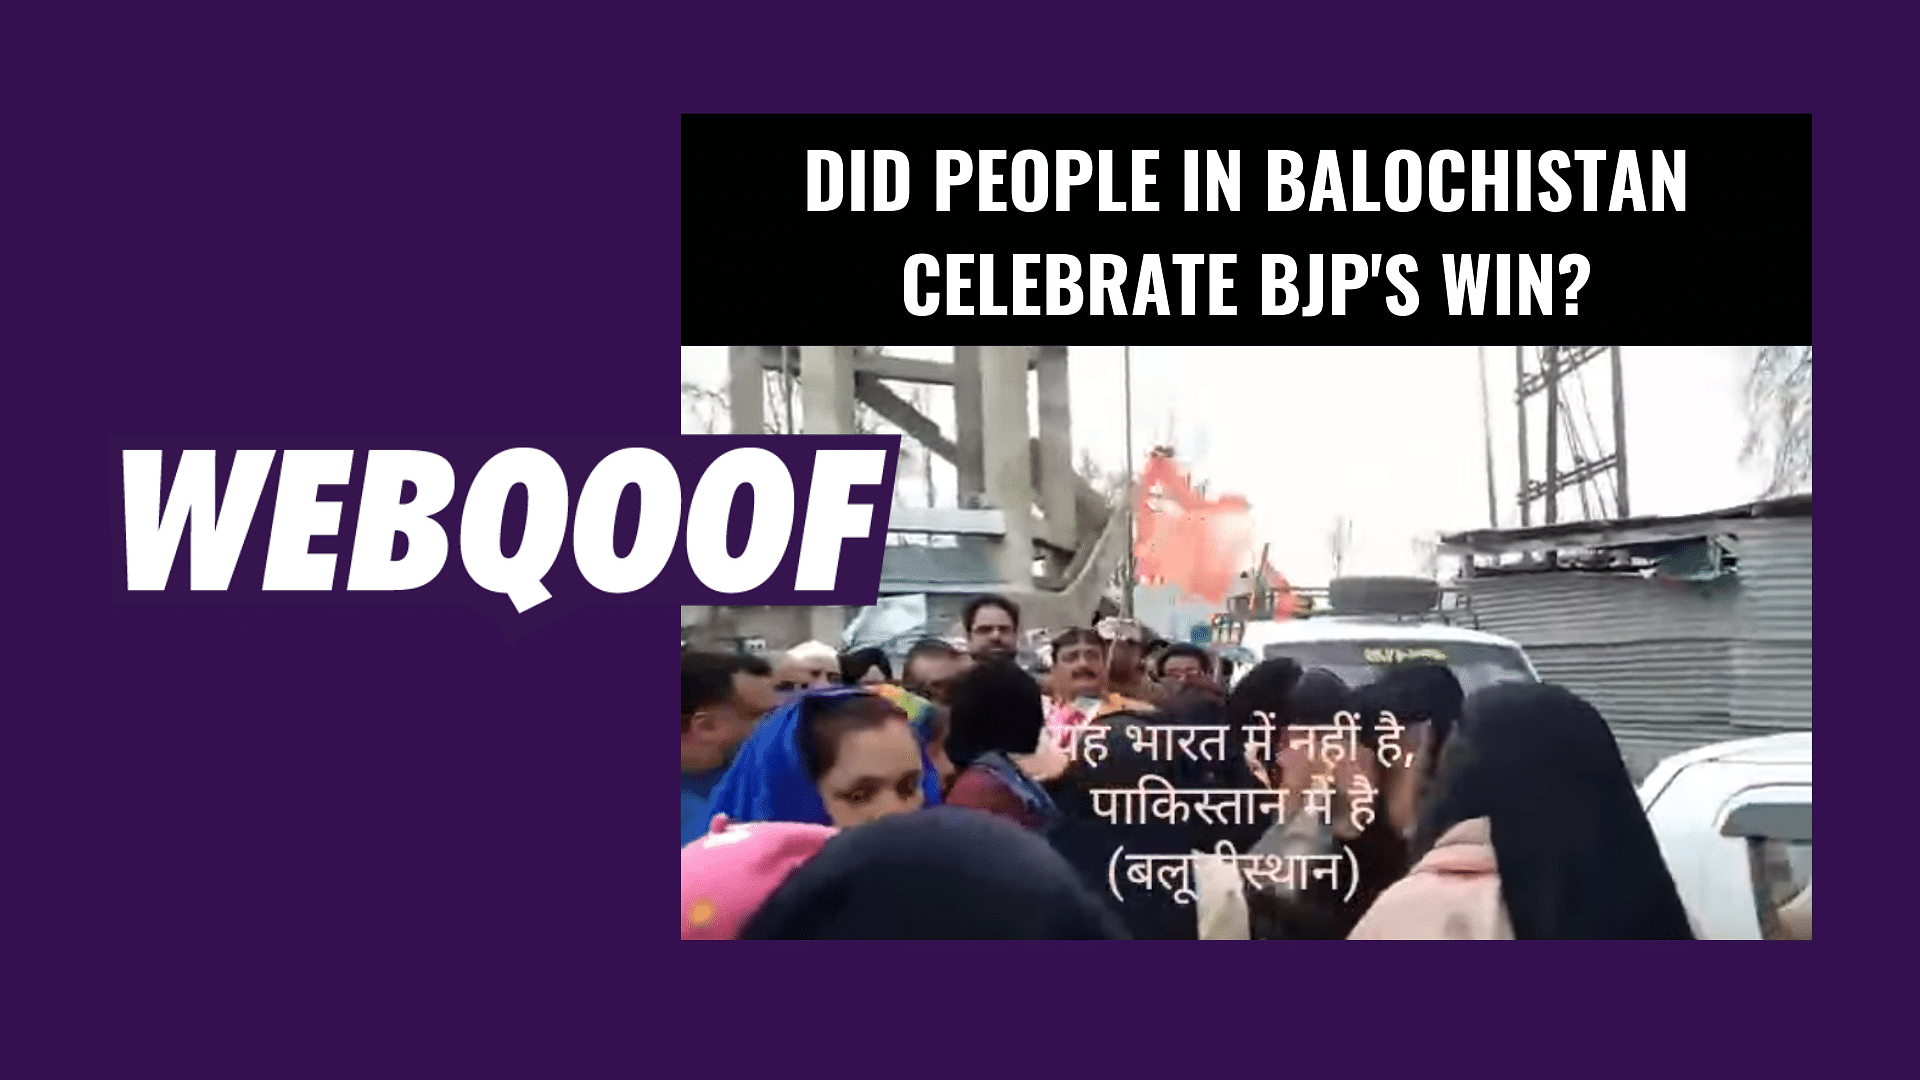 A viral video on social media claimed that people in Pakistan’s Balochistan celebrated BJP’s win.